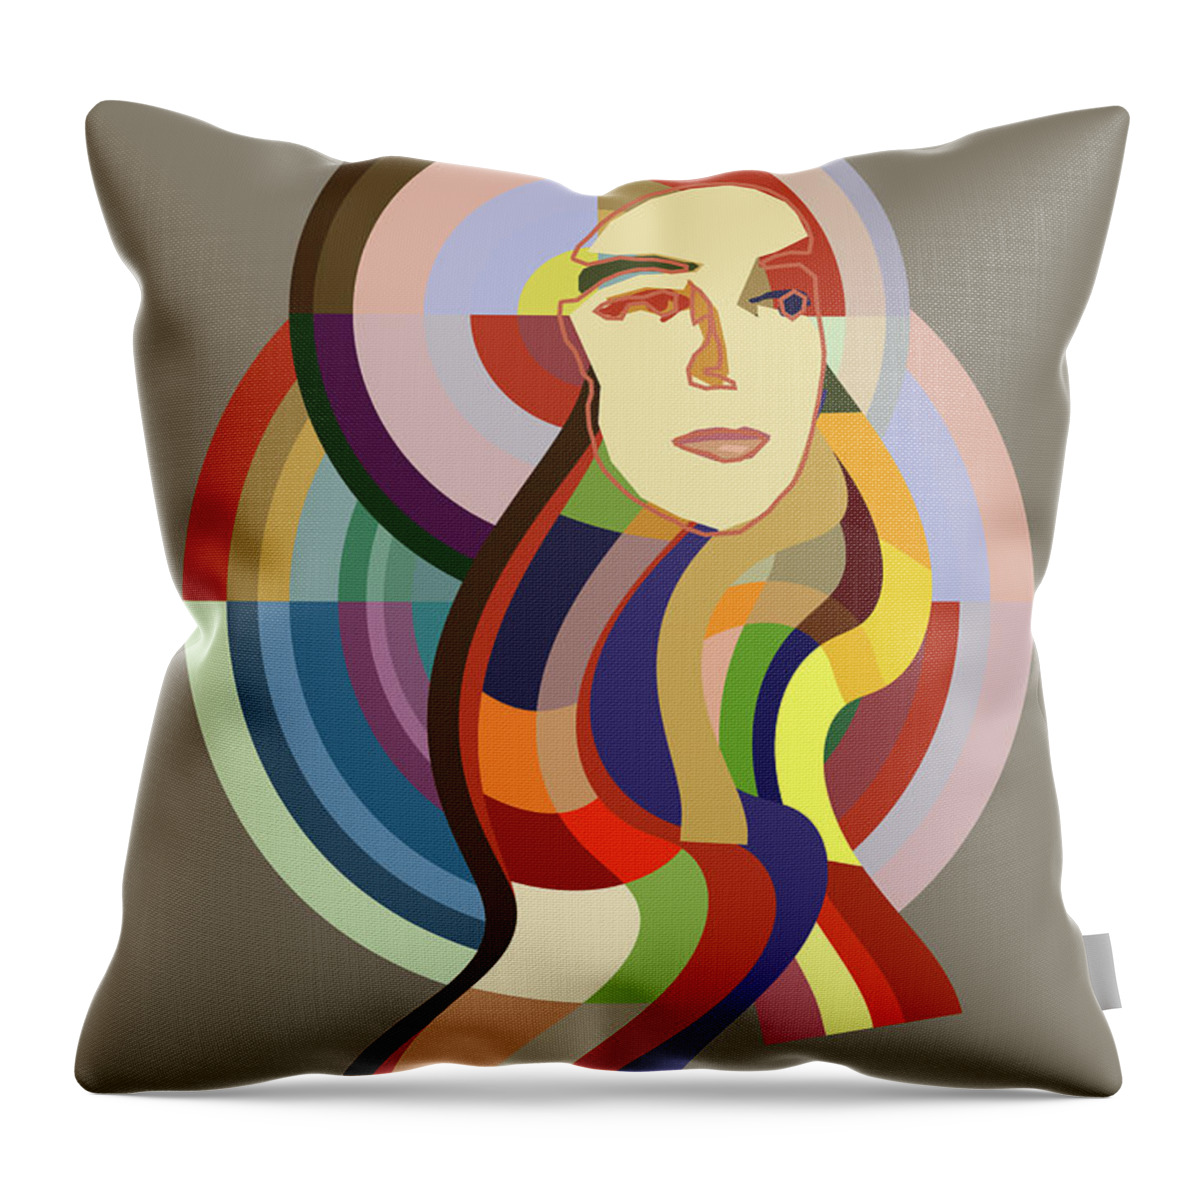 Sonia Delaunay Orphiste Tencc Throw Pillow featuring the digital art Orphiste - Pop Art Portrait of Sonia Delaunay by BFA Prints